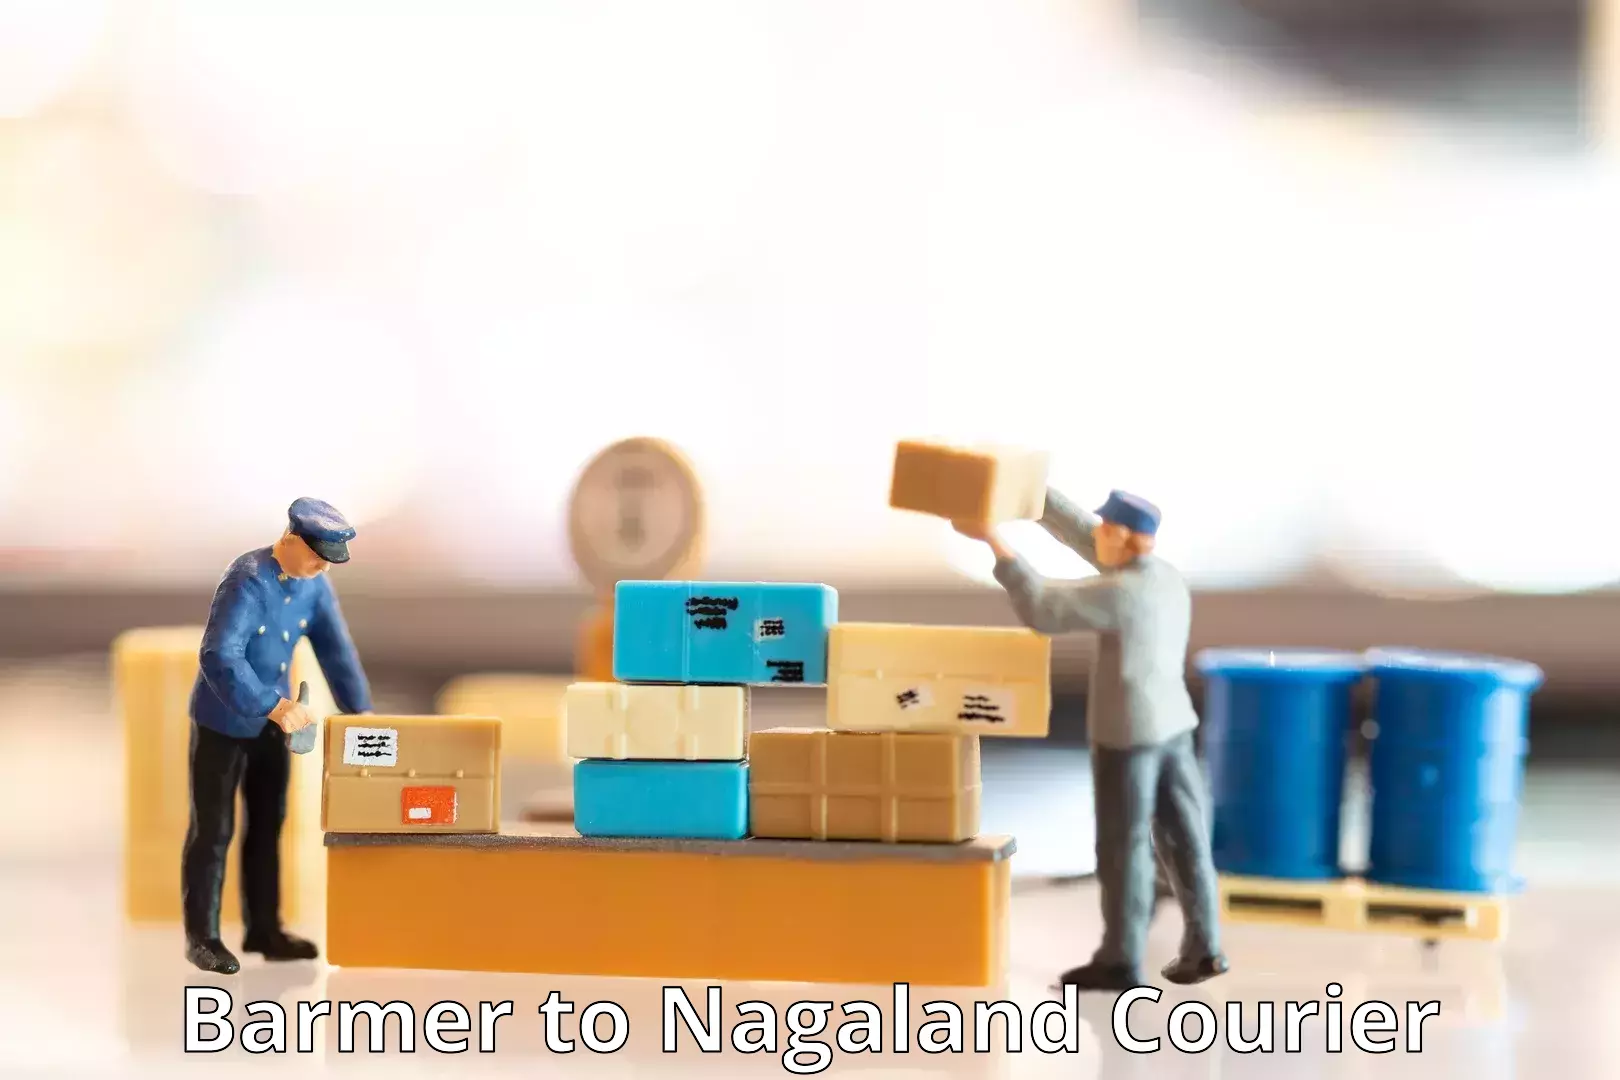 On-call courier service Barmer to Nagaland